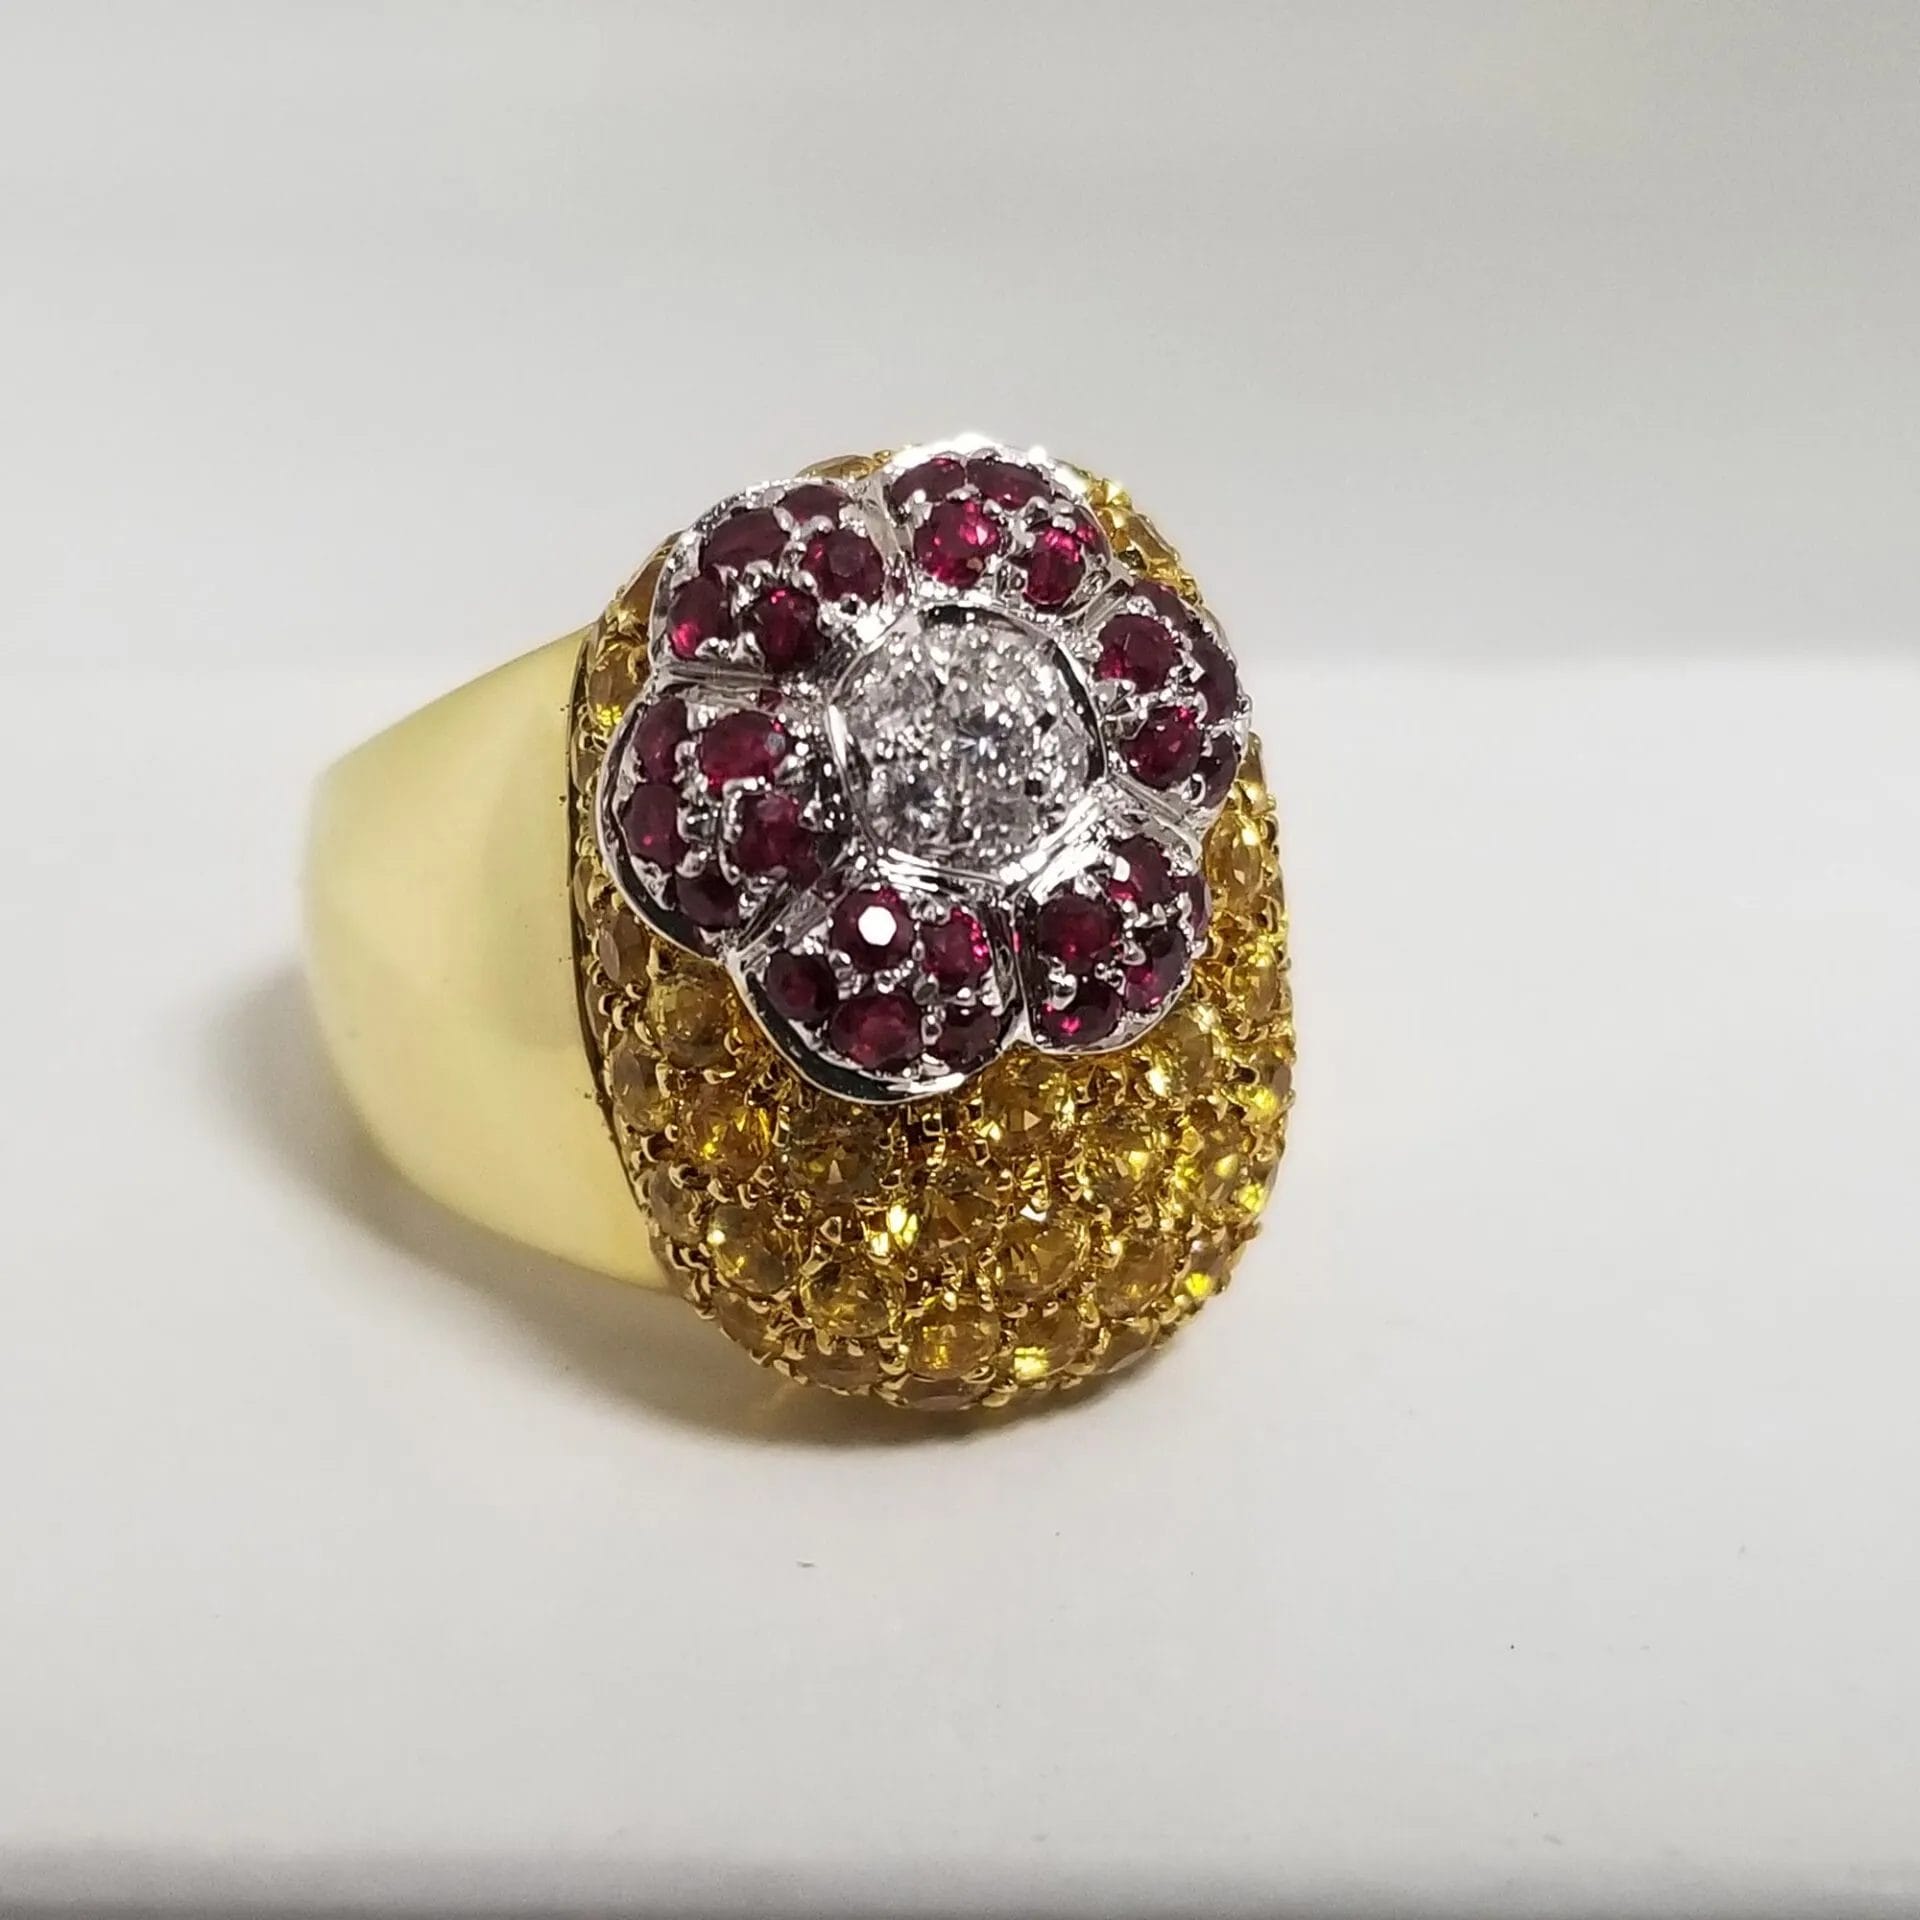 A yellow gold ring with red and yellow diamonds.